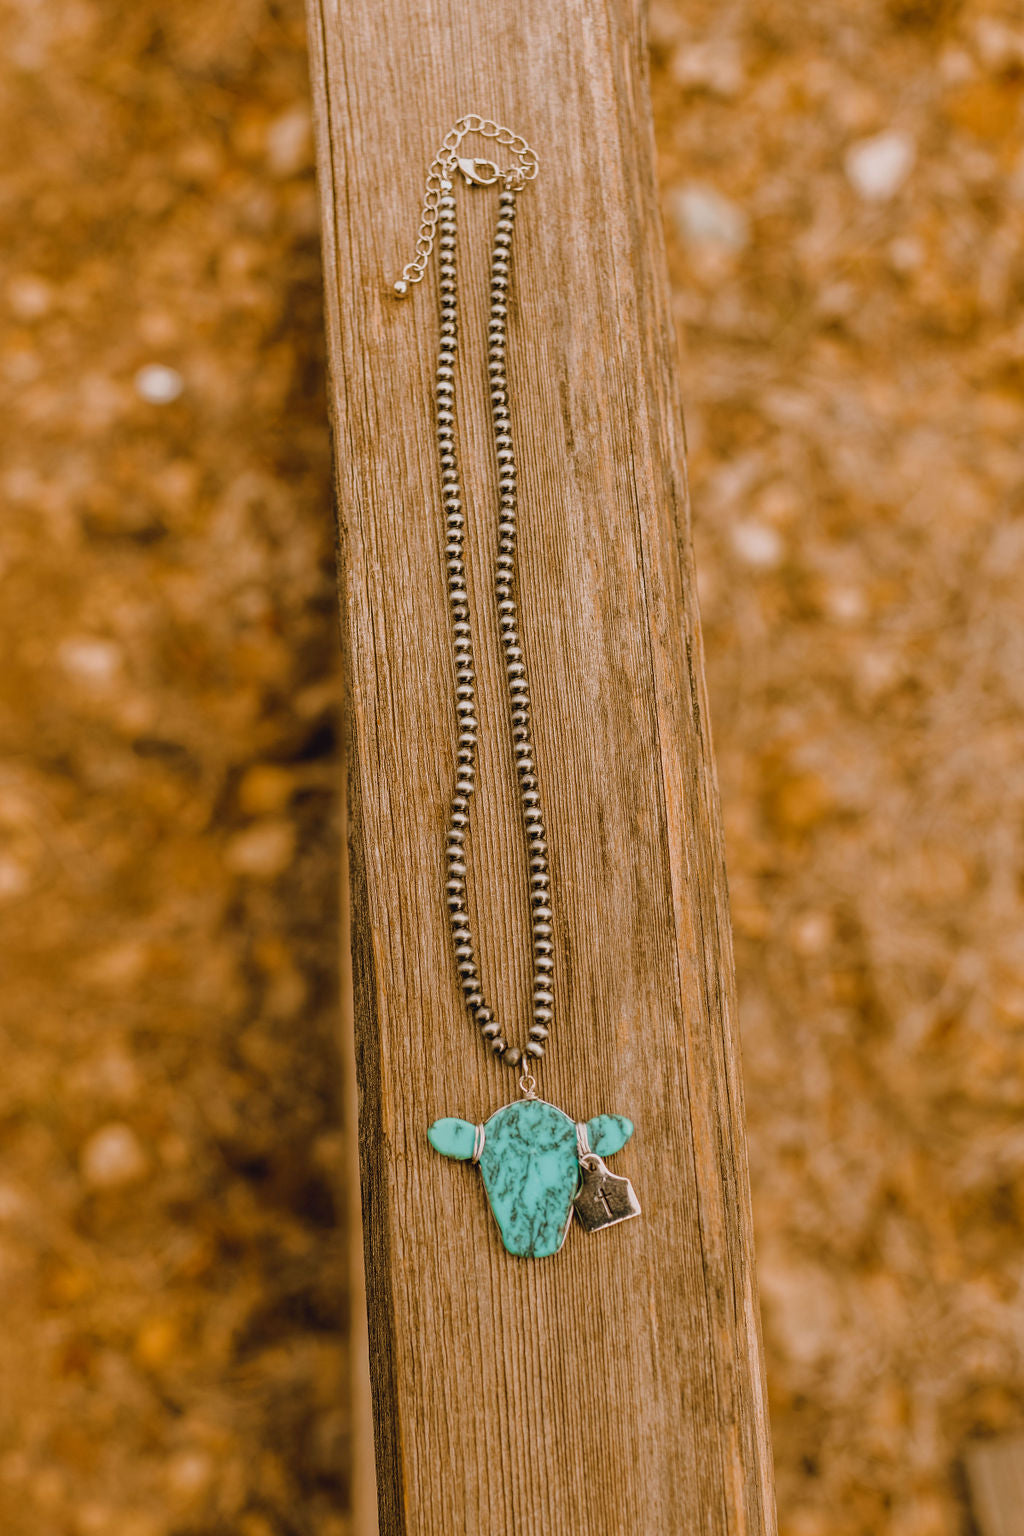 Turquoise Cow and Cattle Tag Charm Pearl Necklace